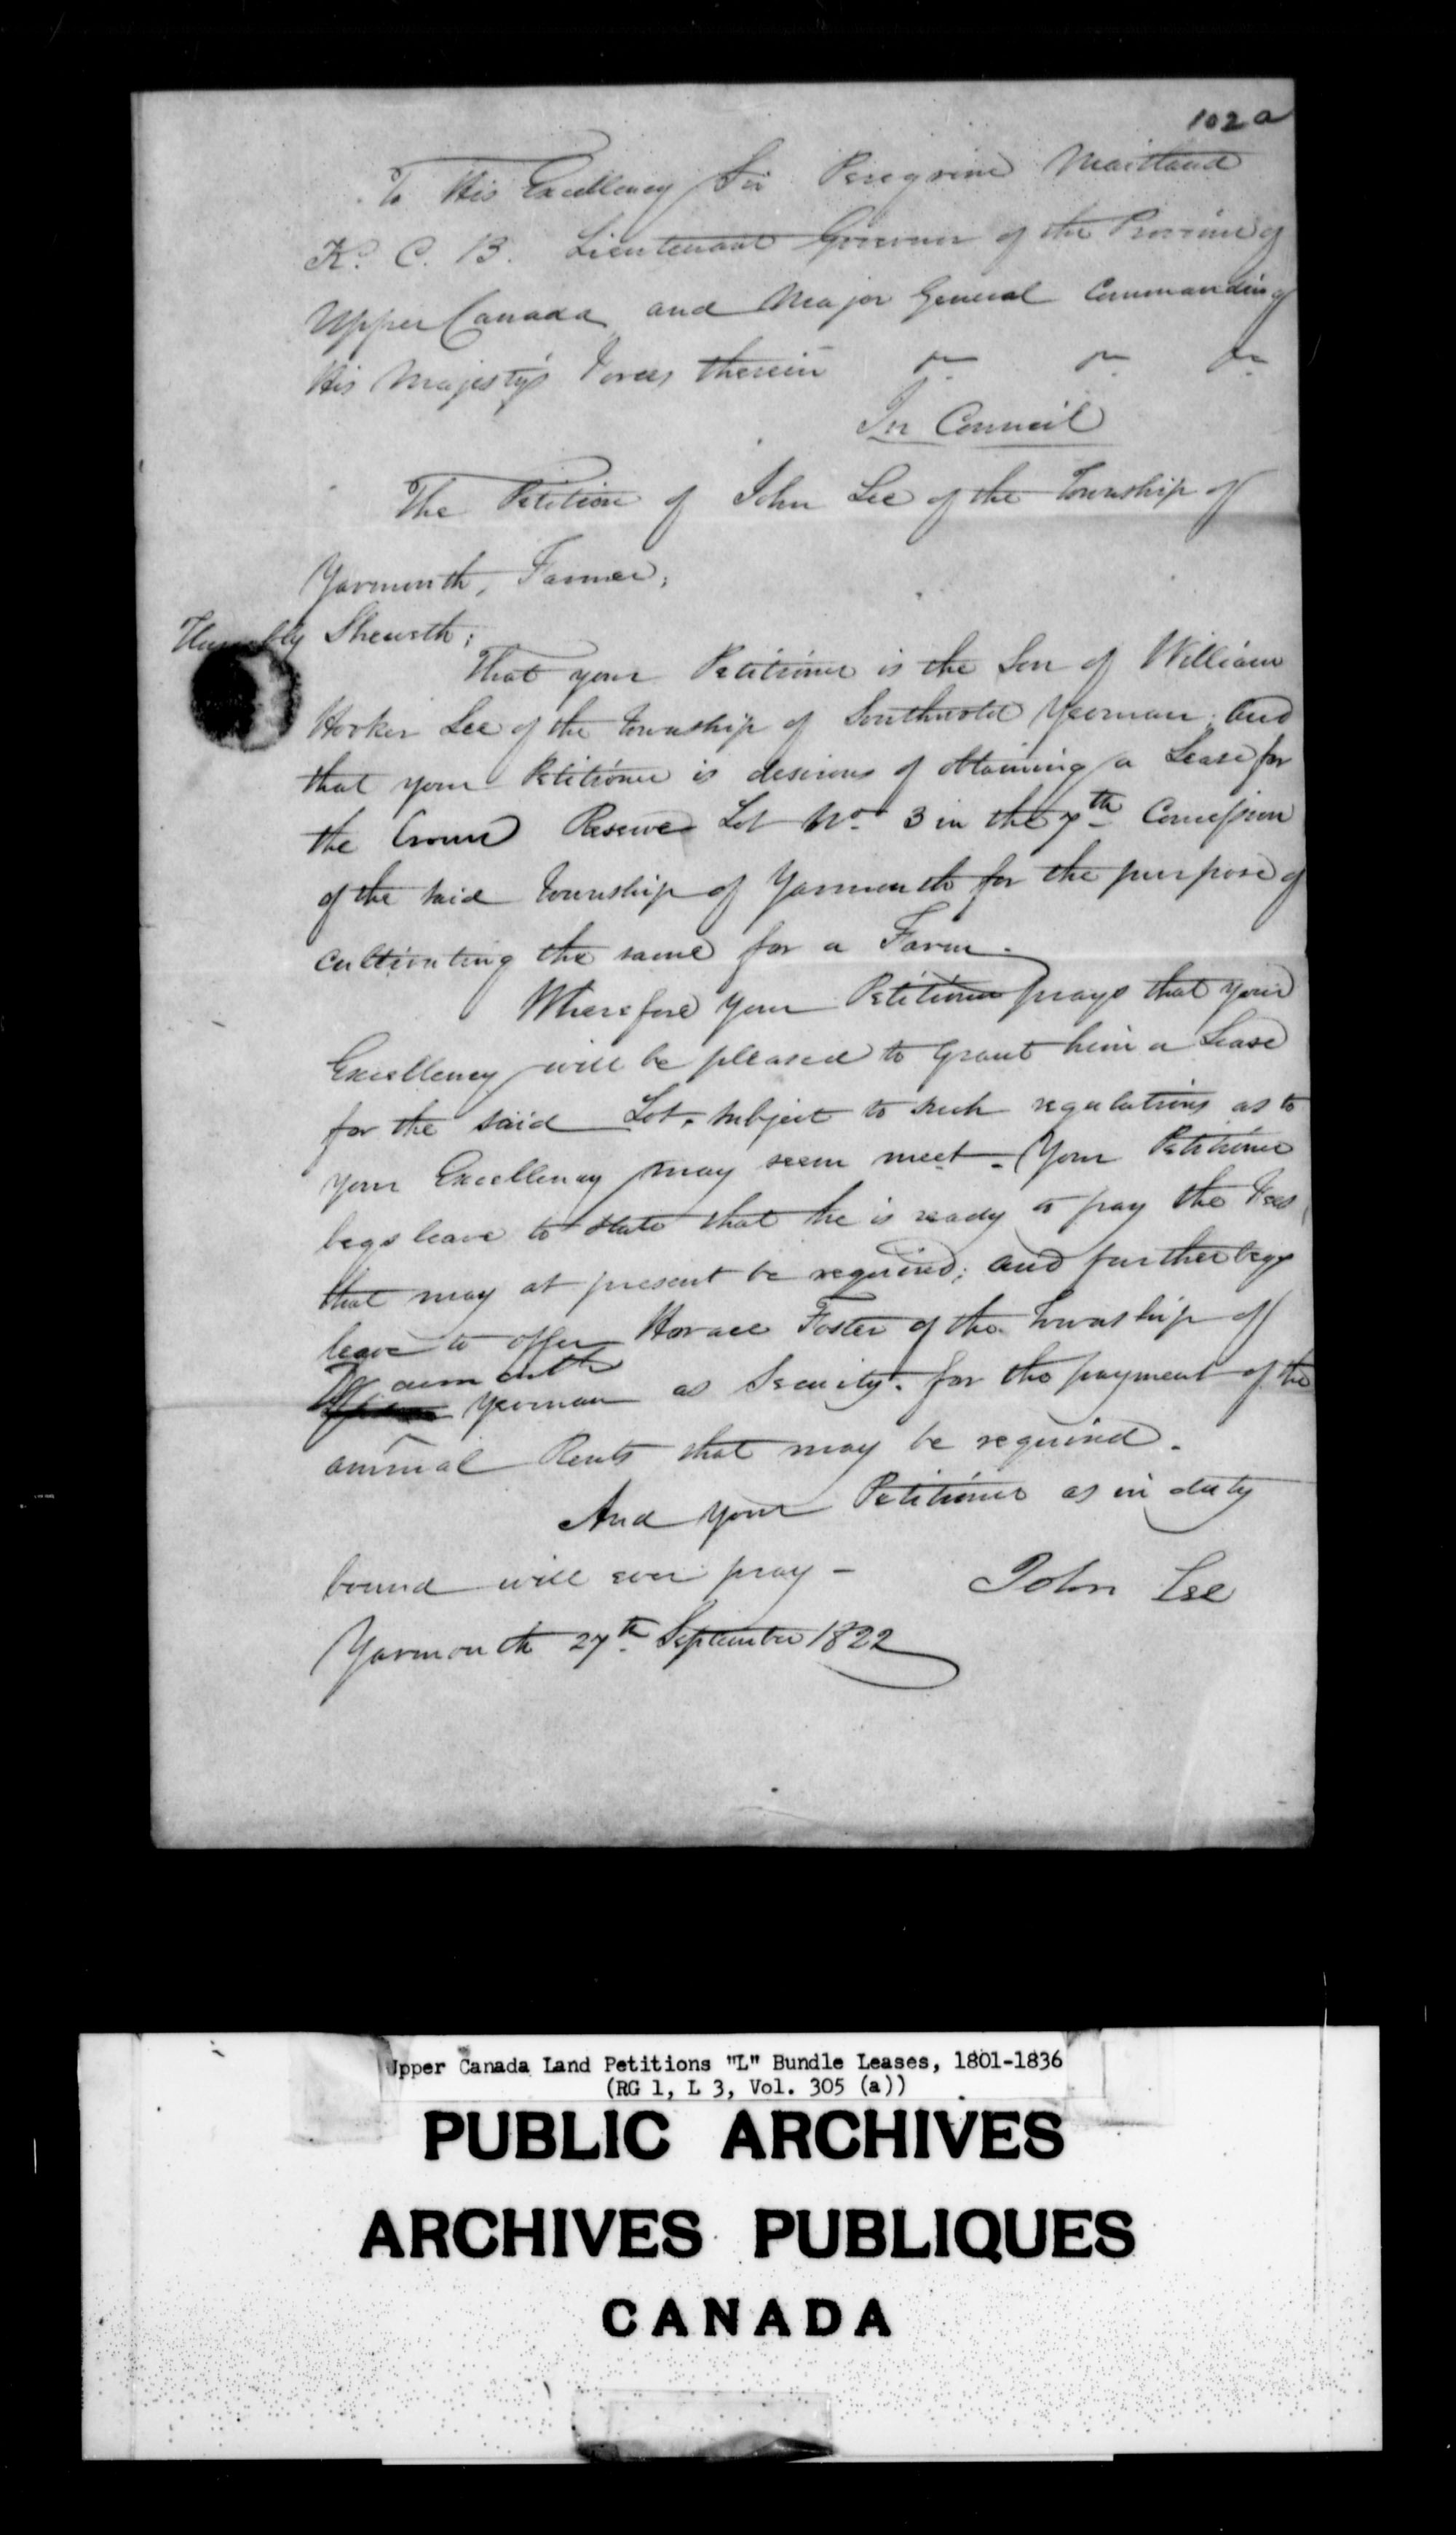 Title: Upper Canada Land Petitions (1763-1865) - Mikan Number: 205131 - Microform: c-2137